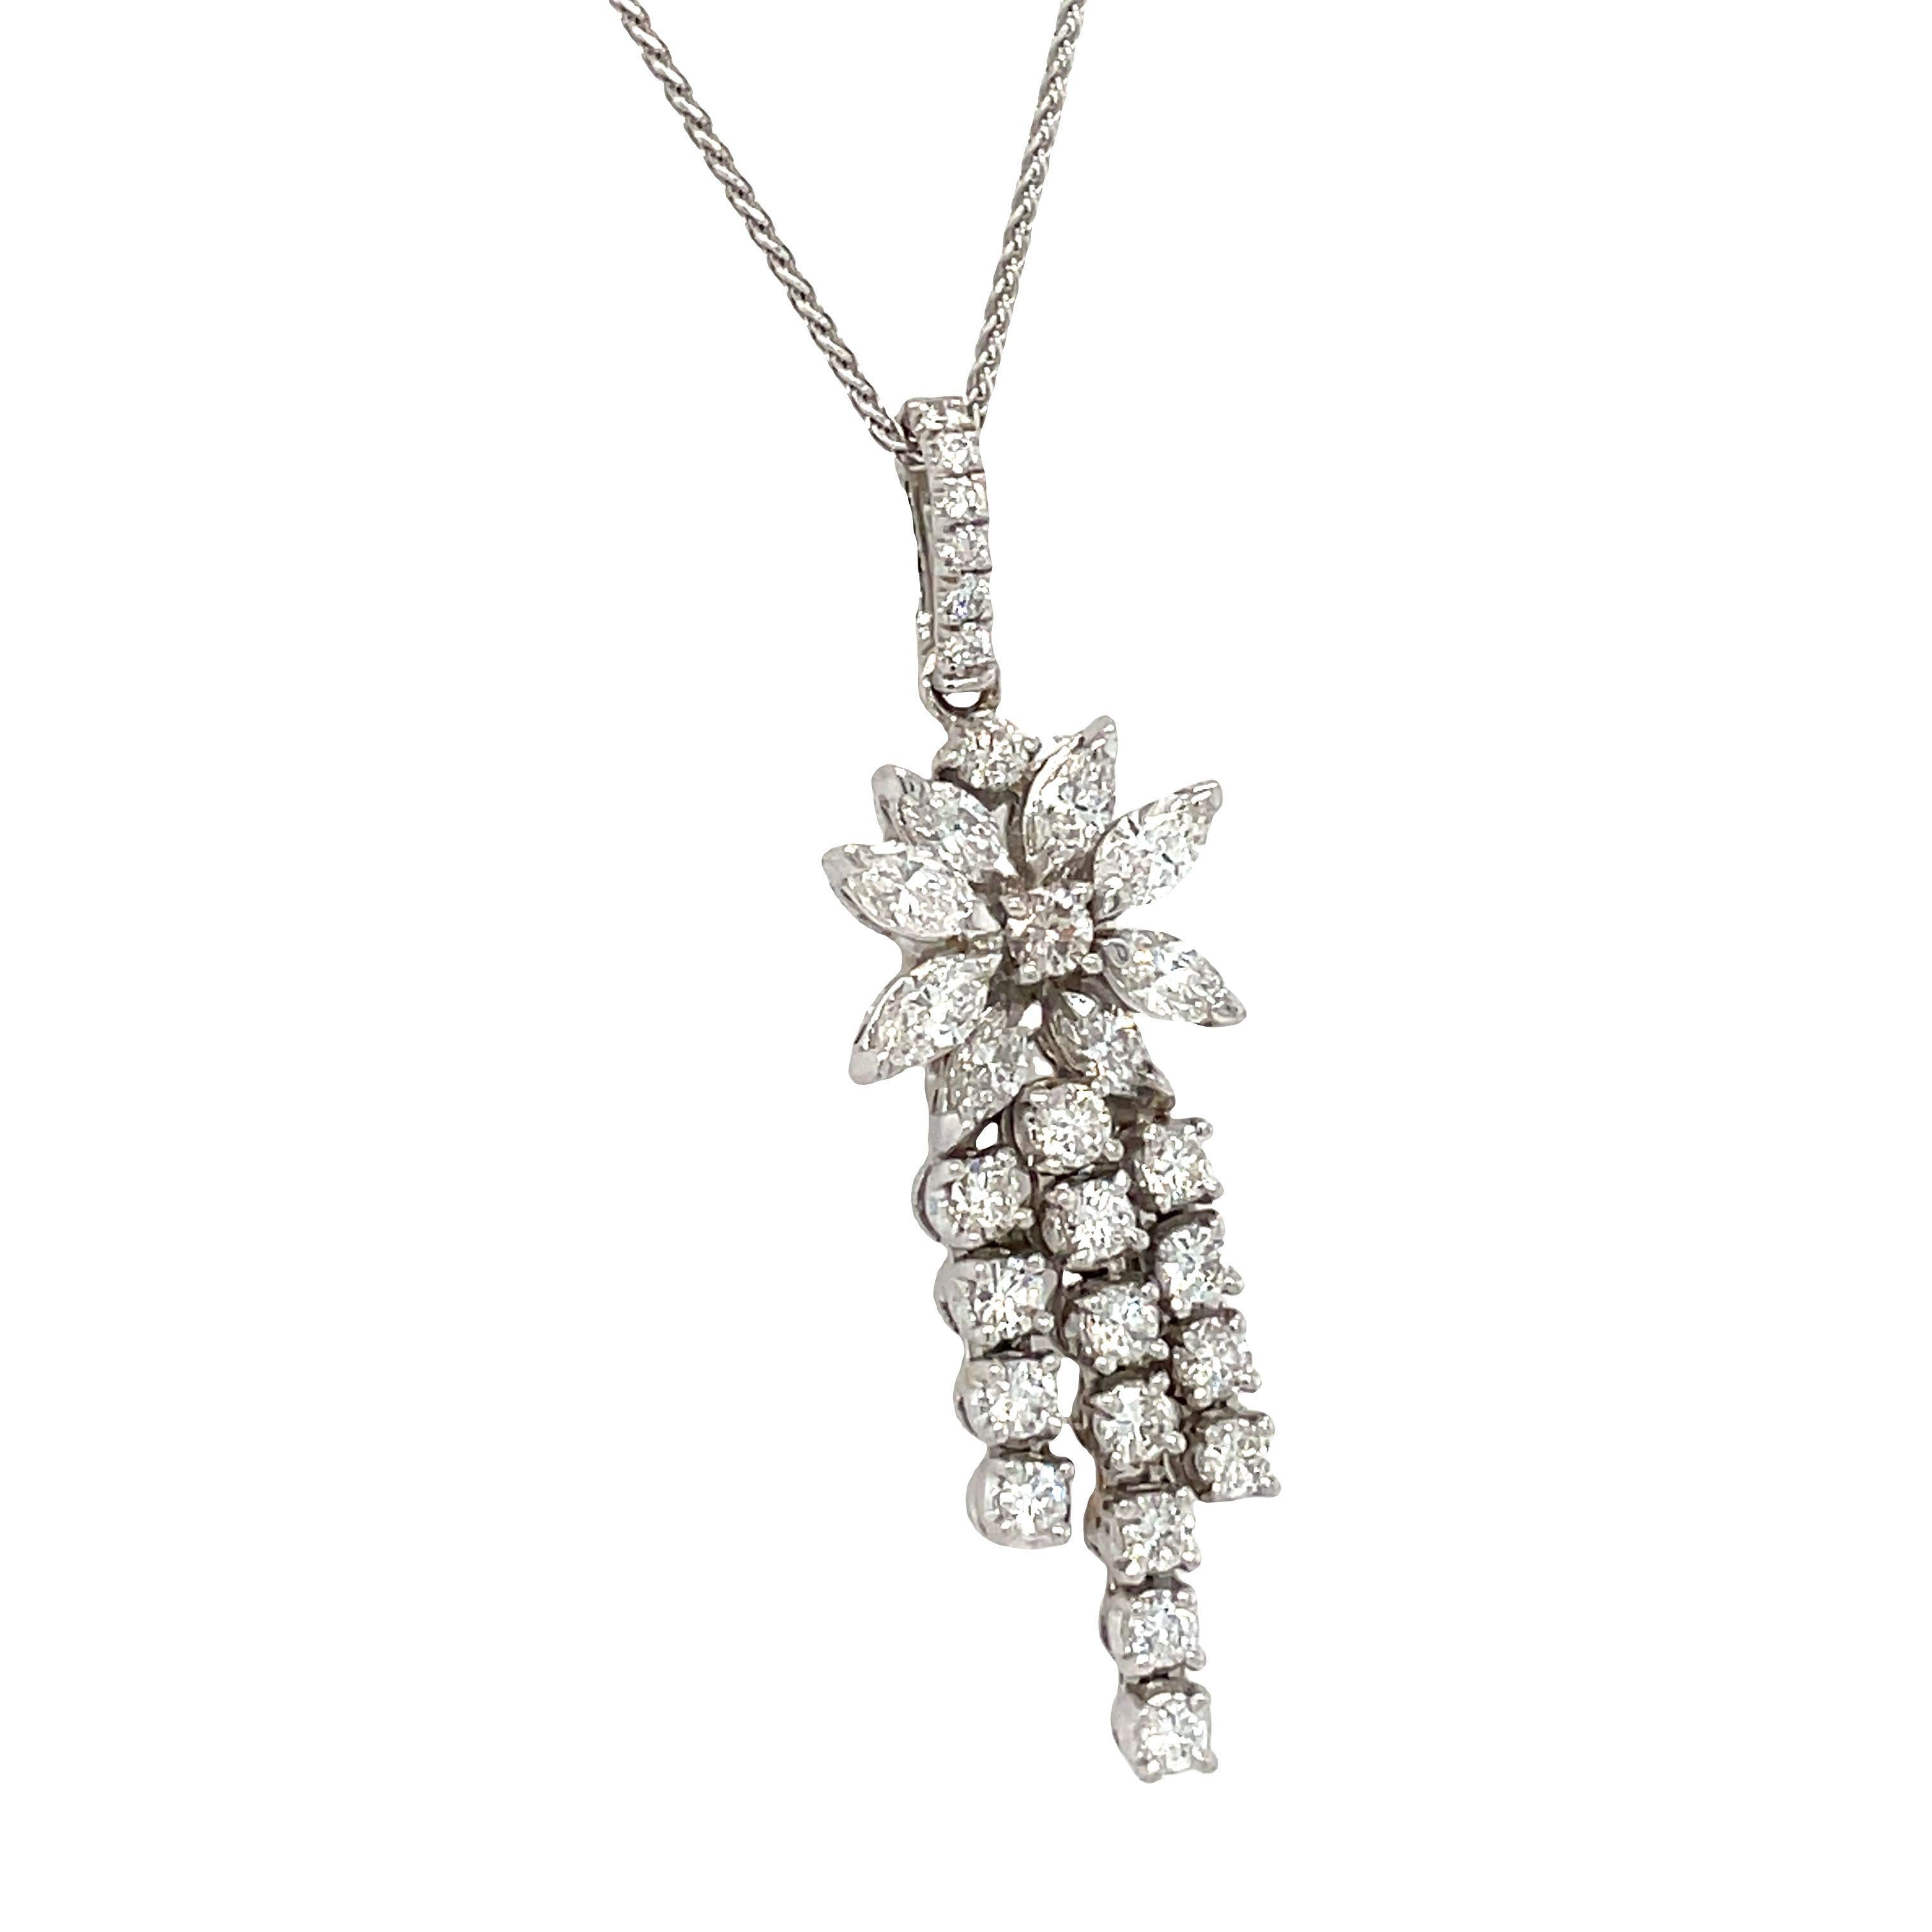 The breathtaking and whimsical nature of this necklace makes it a truly standout piece. This gorgeous piece features a beautiful flower design pendant crafted in 14k white gold. The pendant showcases a combination of round and marquise cut natural